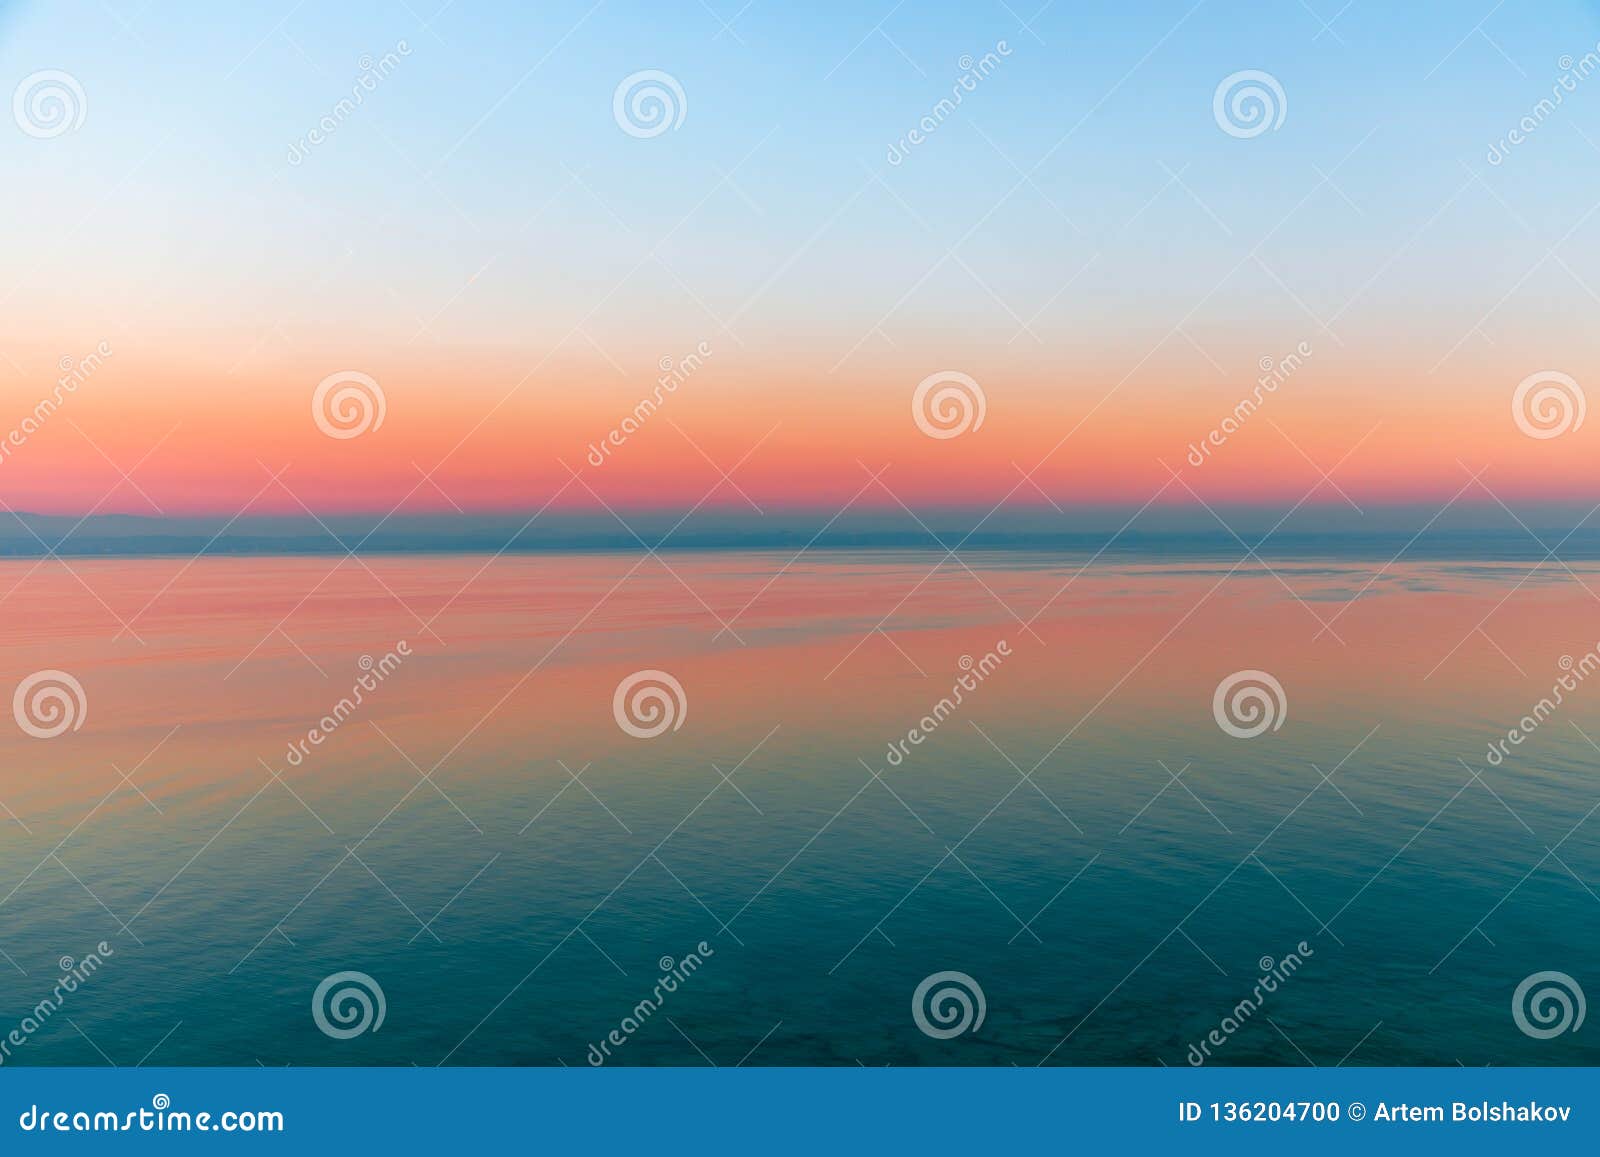 beautiful multicolor sunset reflected in the waters of lake garda, italy. skyline. visible coastline in the evening fog. winter